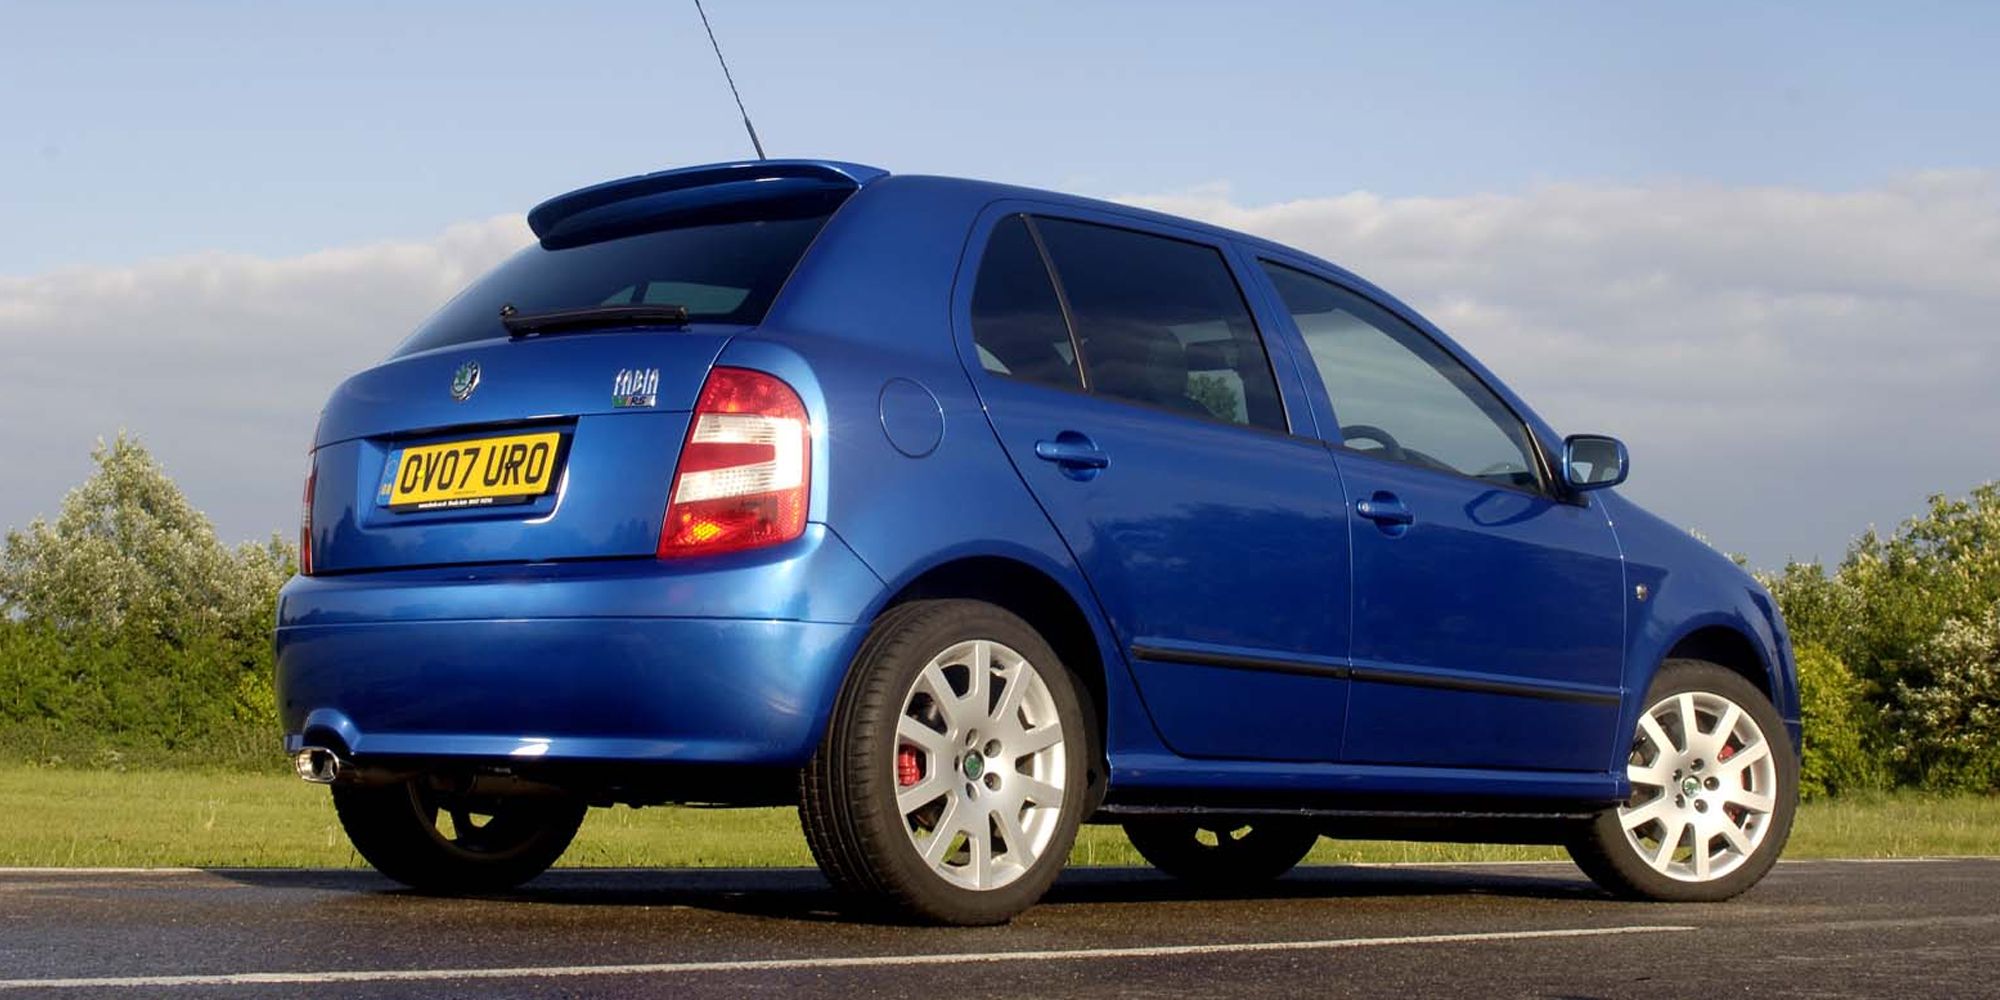 Rear 3/4 view of the Fabia RS